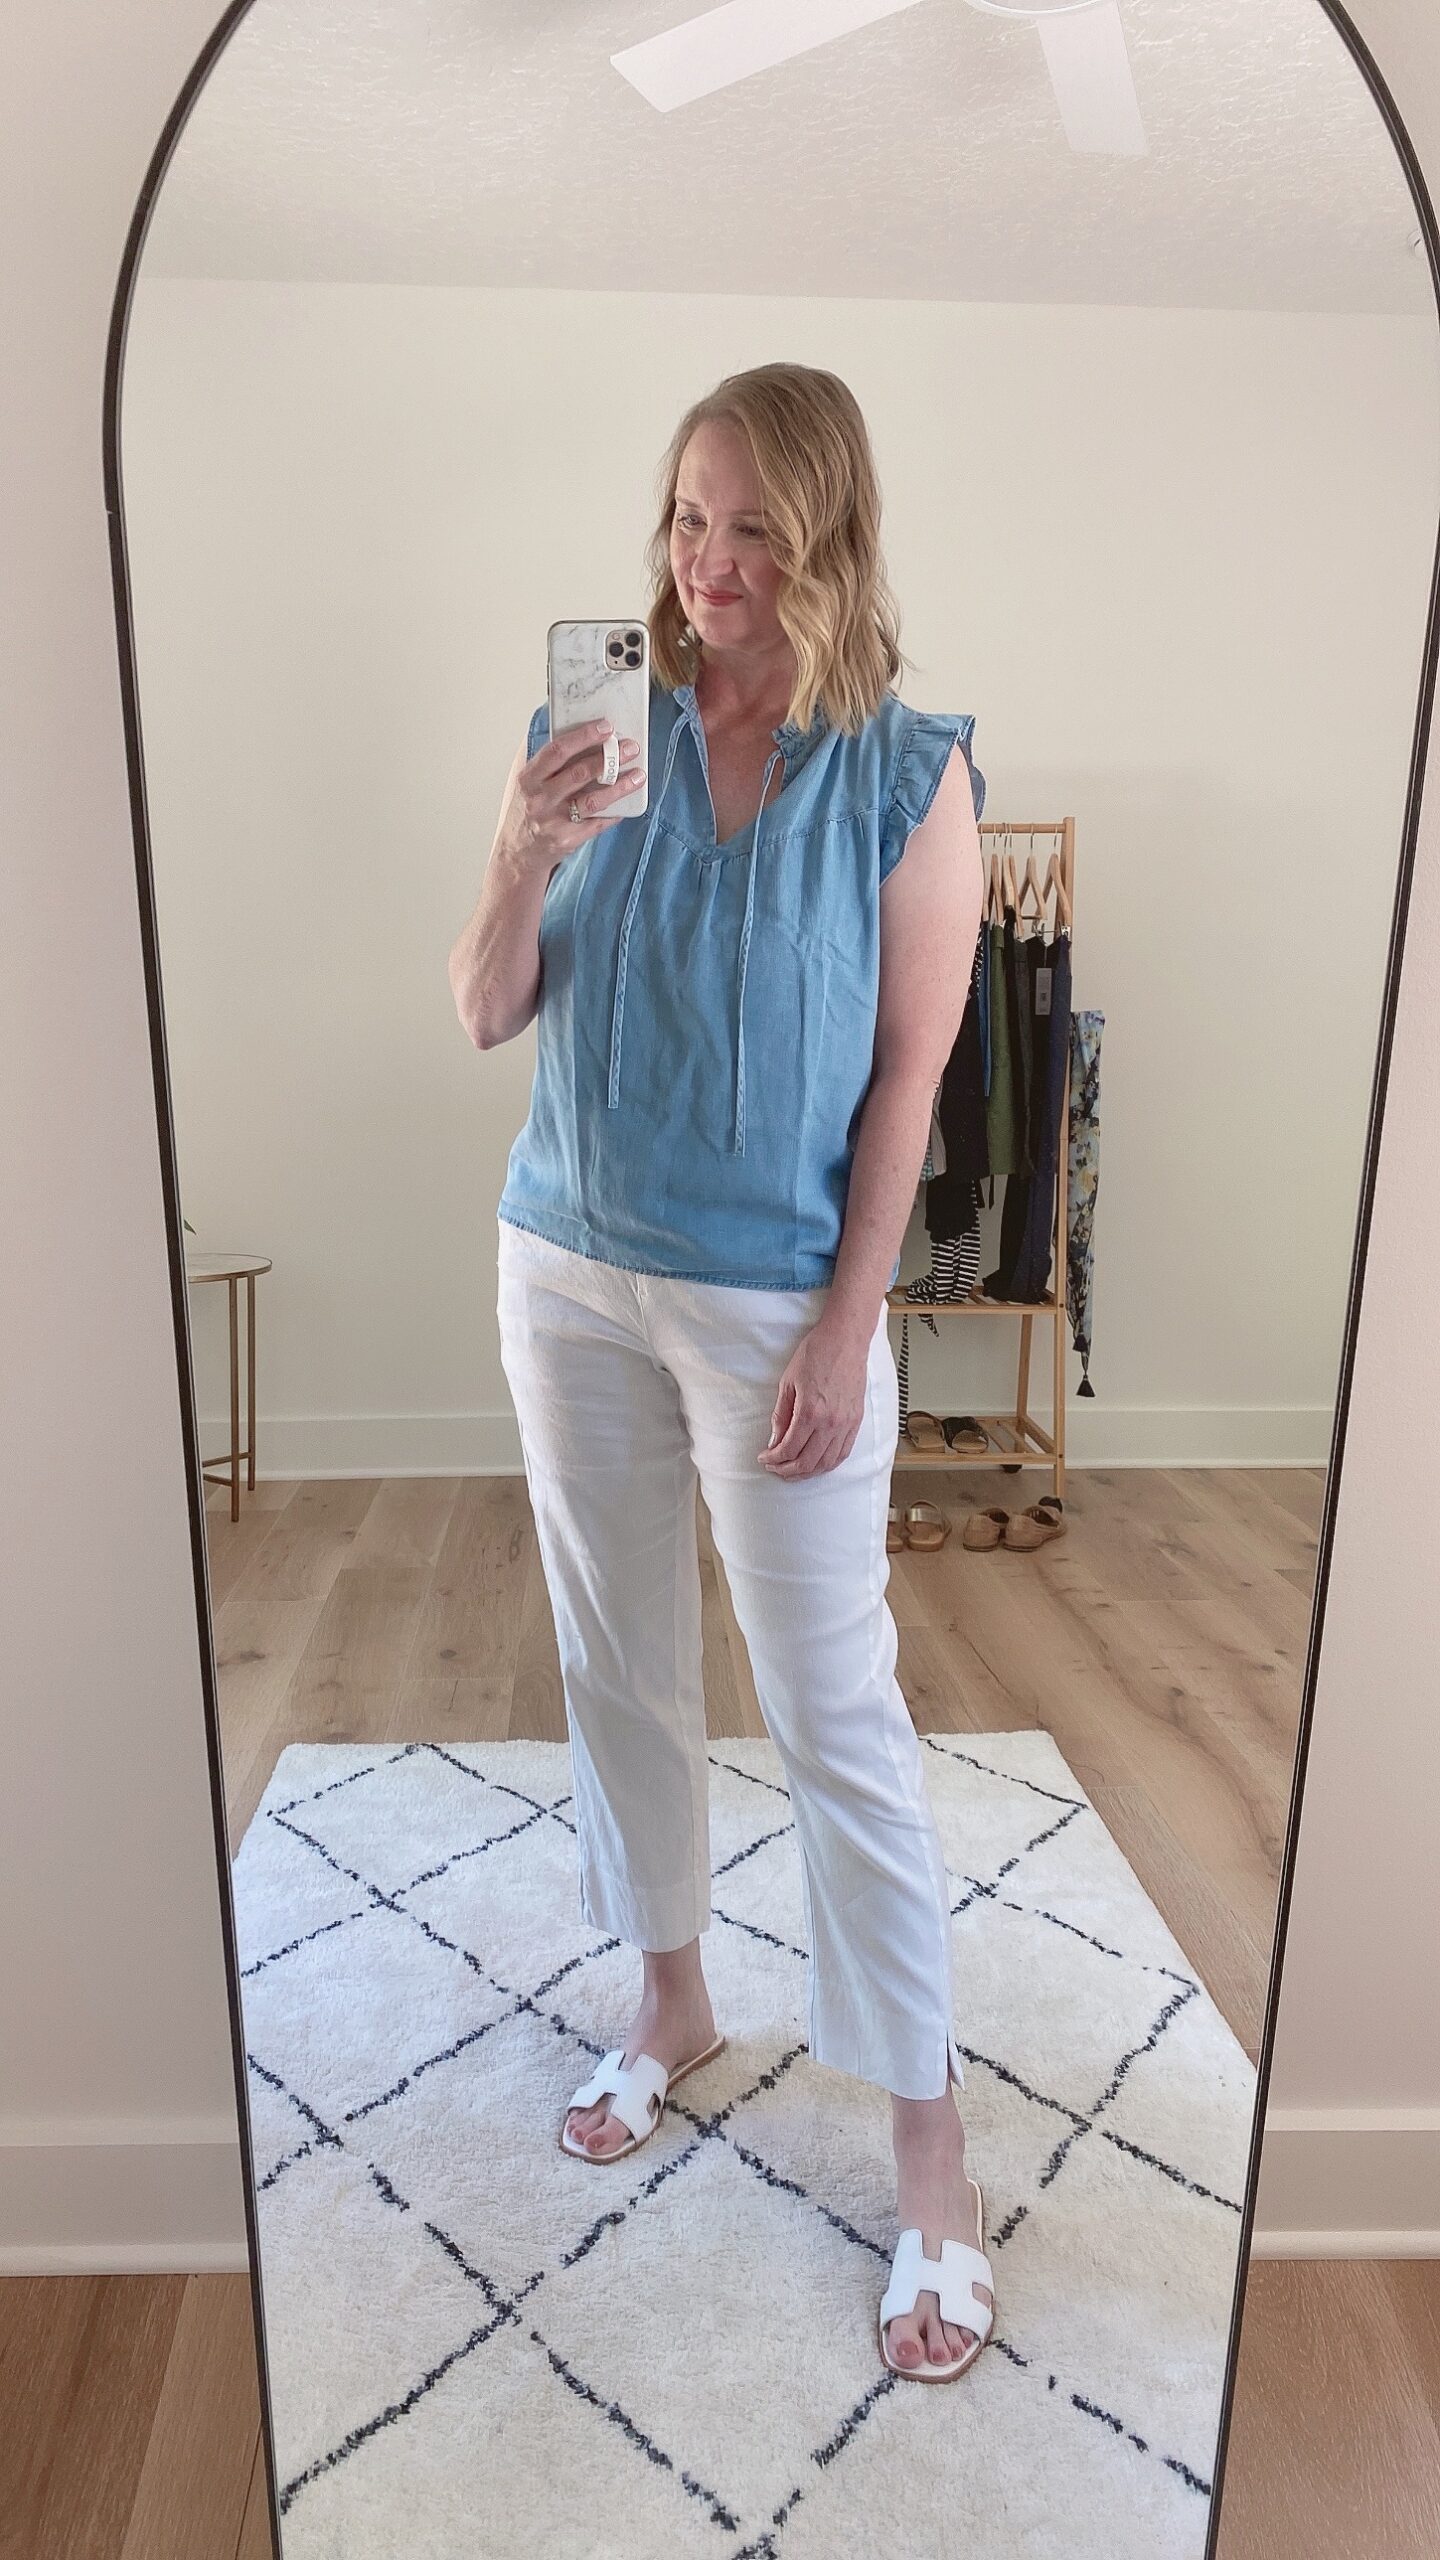 https://classyyettrendy.com/wp-content/uploads/2023/05/TRY-ON-SESSION-REVIEWS-MAY-2023-LOFT-CHAMBRAY-TOP-J-JILL-WHITE-LINEN-PANTS-STEVE-MADDEN-HADYN-SANDALS-scaled.jpg